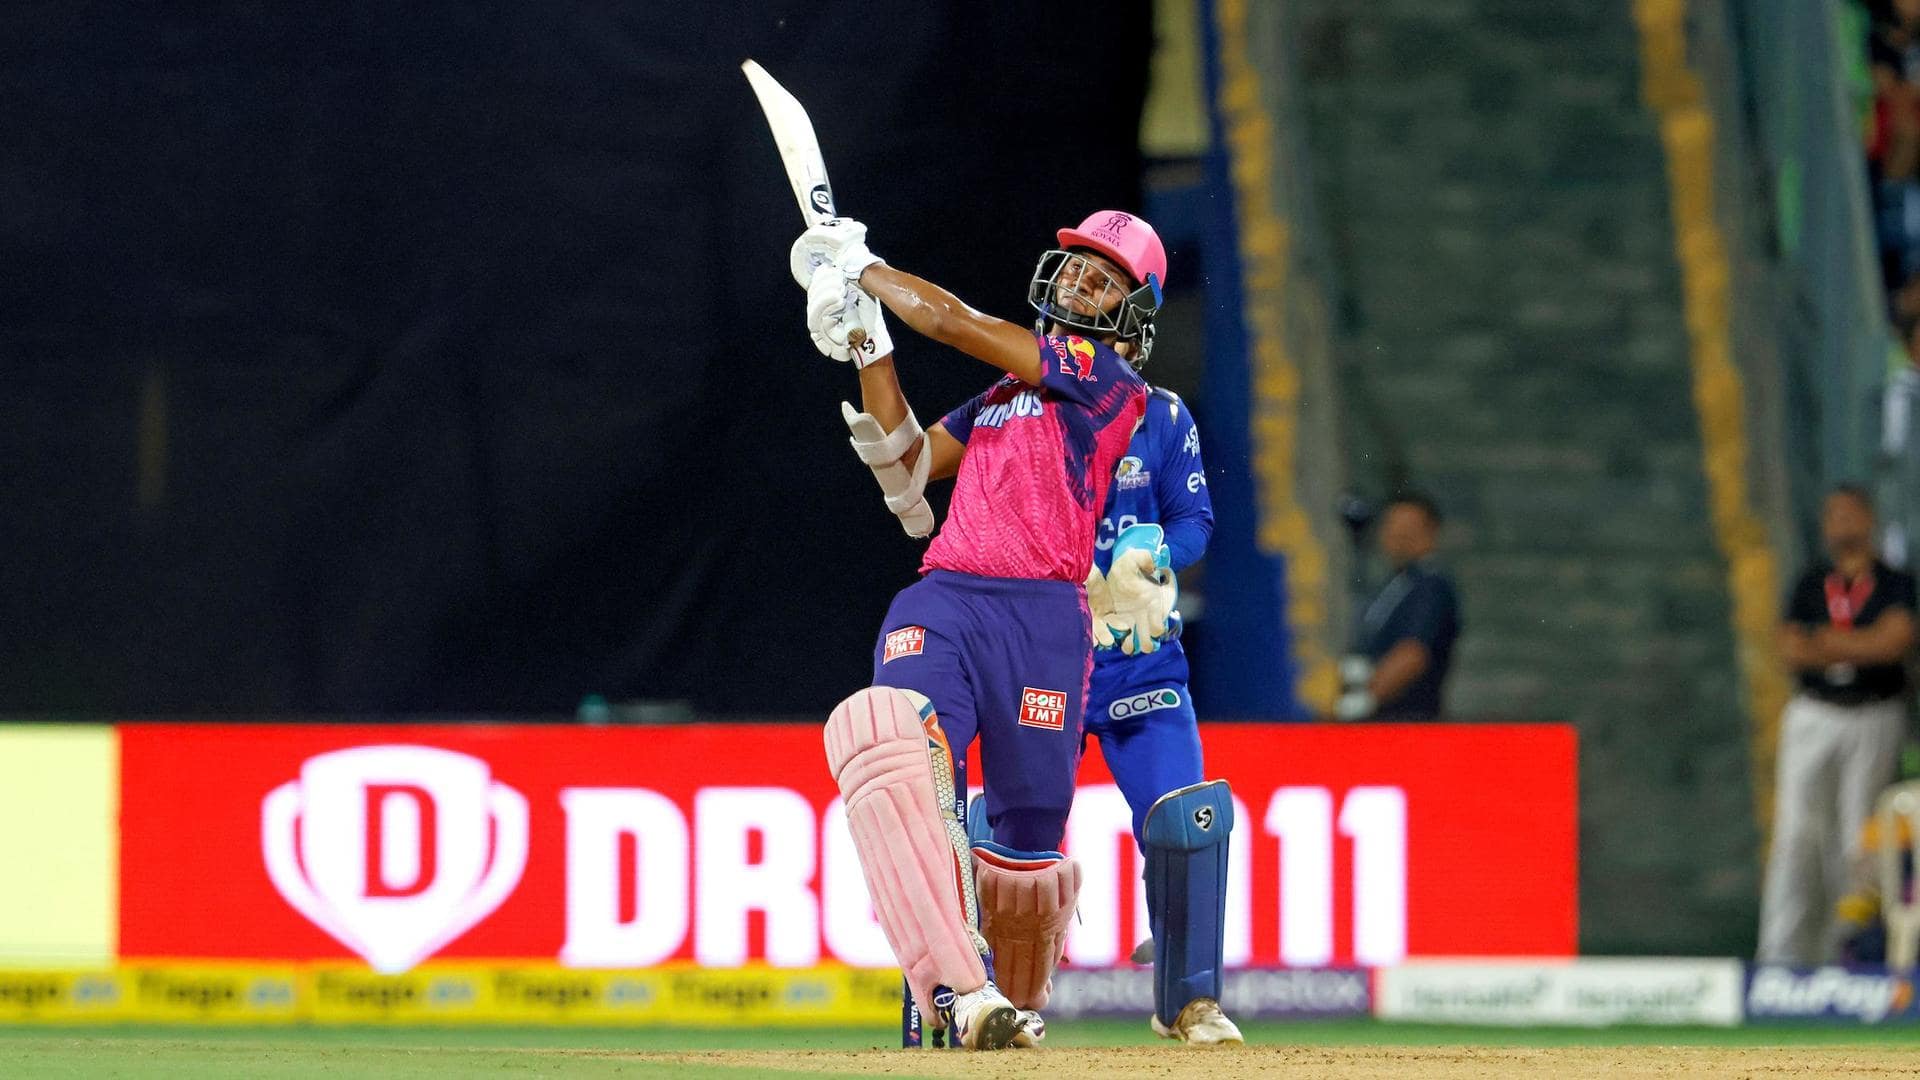 Yashasvi Jaiswal becomes RR's youngest centurion in IPL: Key stats